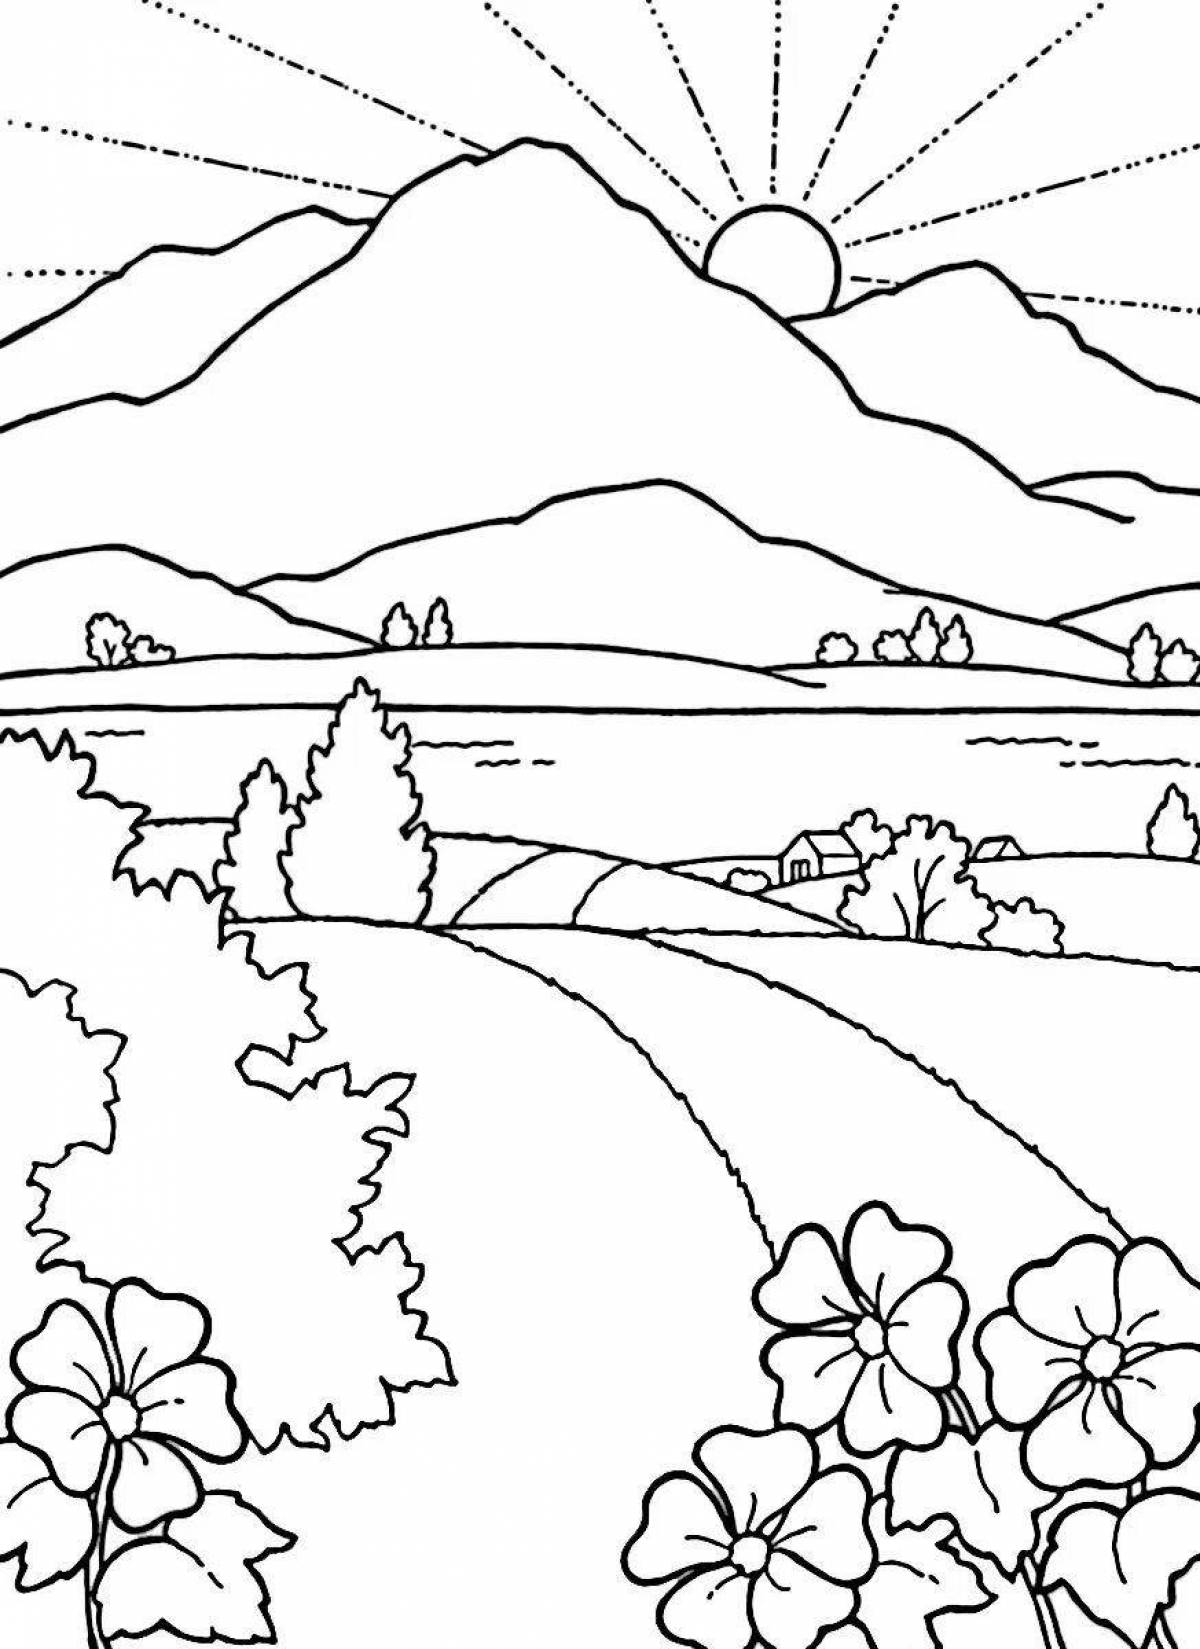 Exciting native landscape coloring book